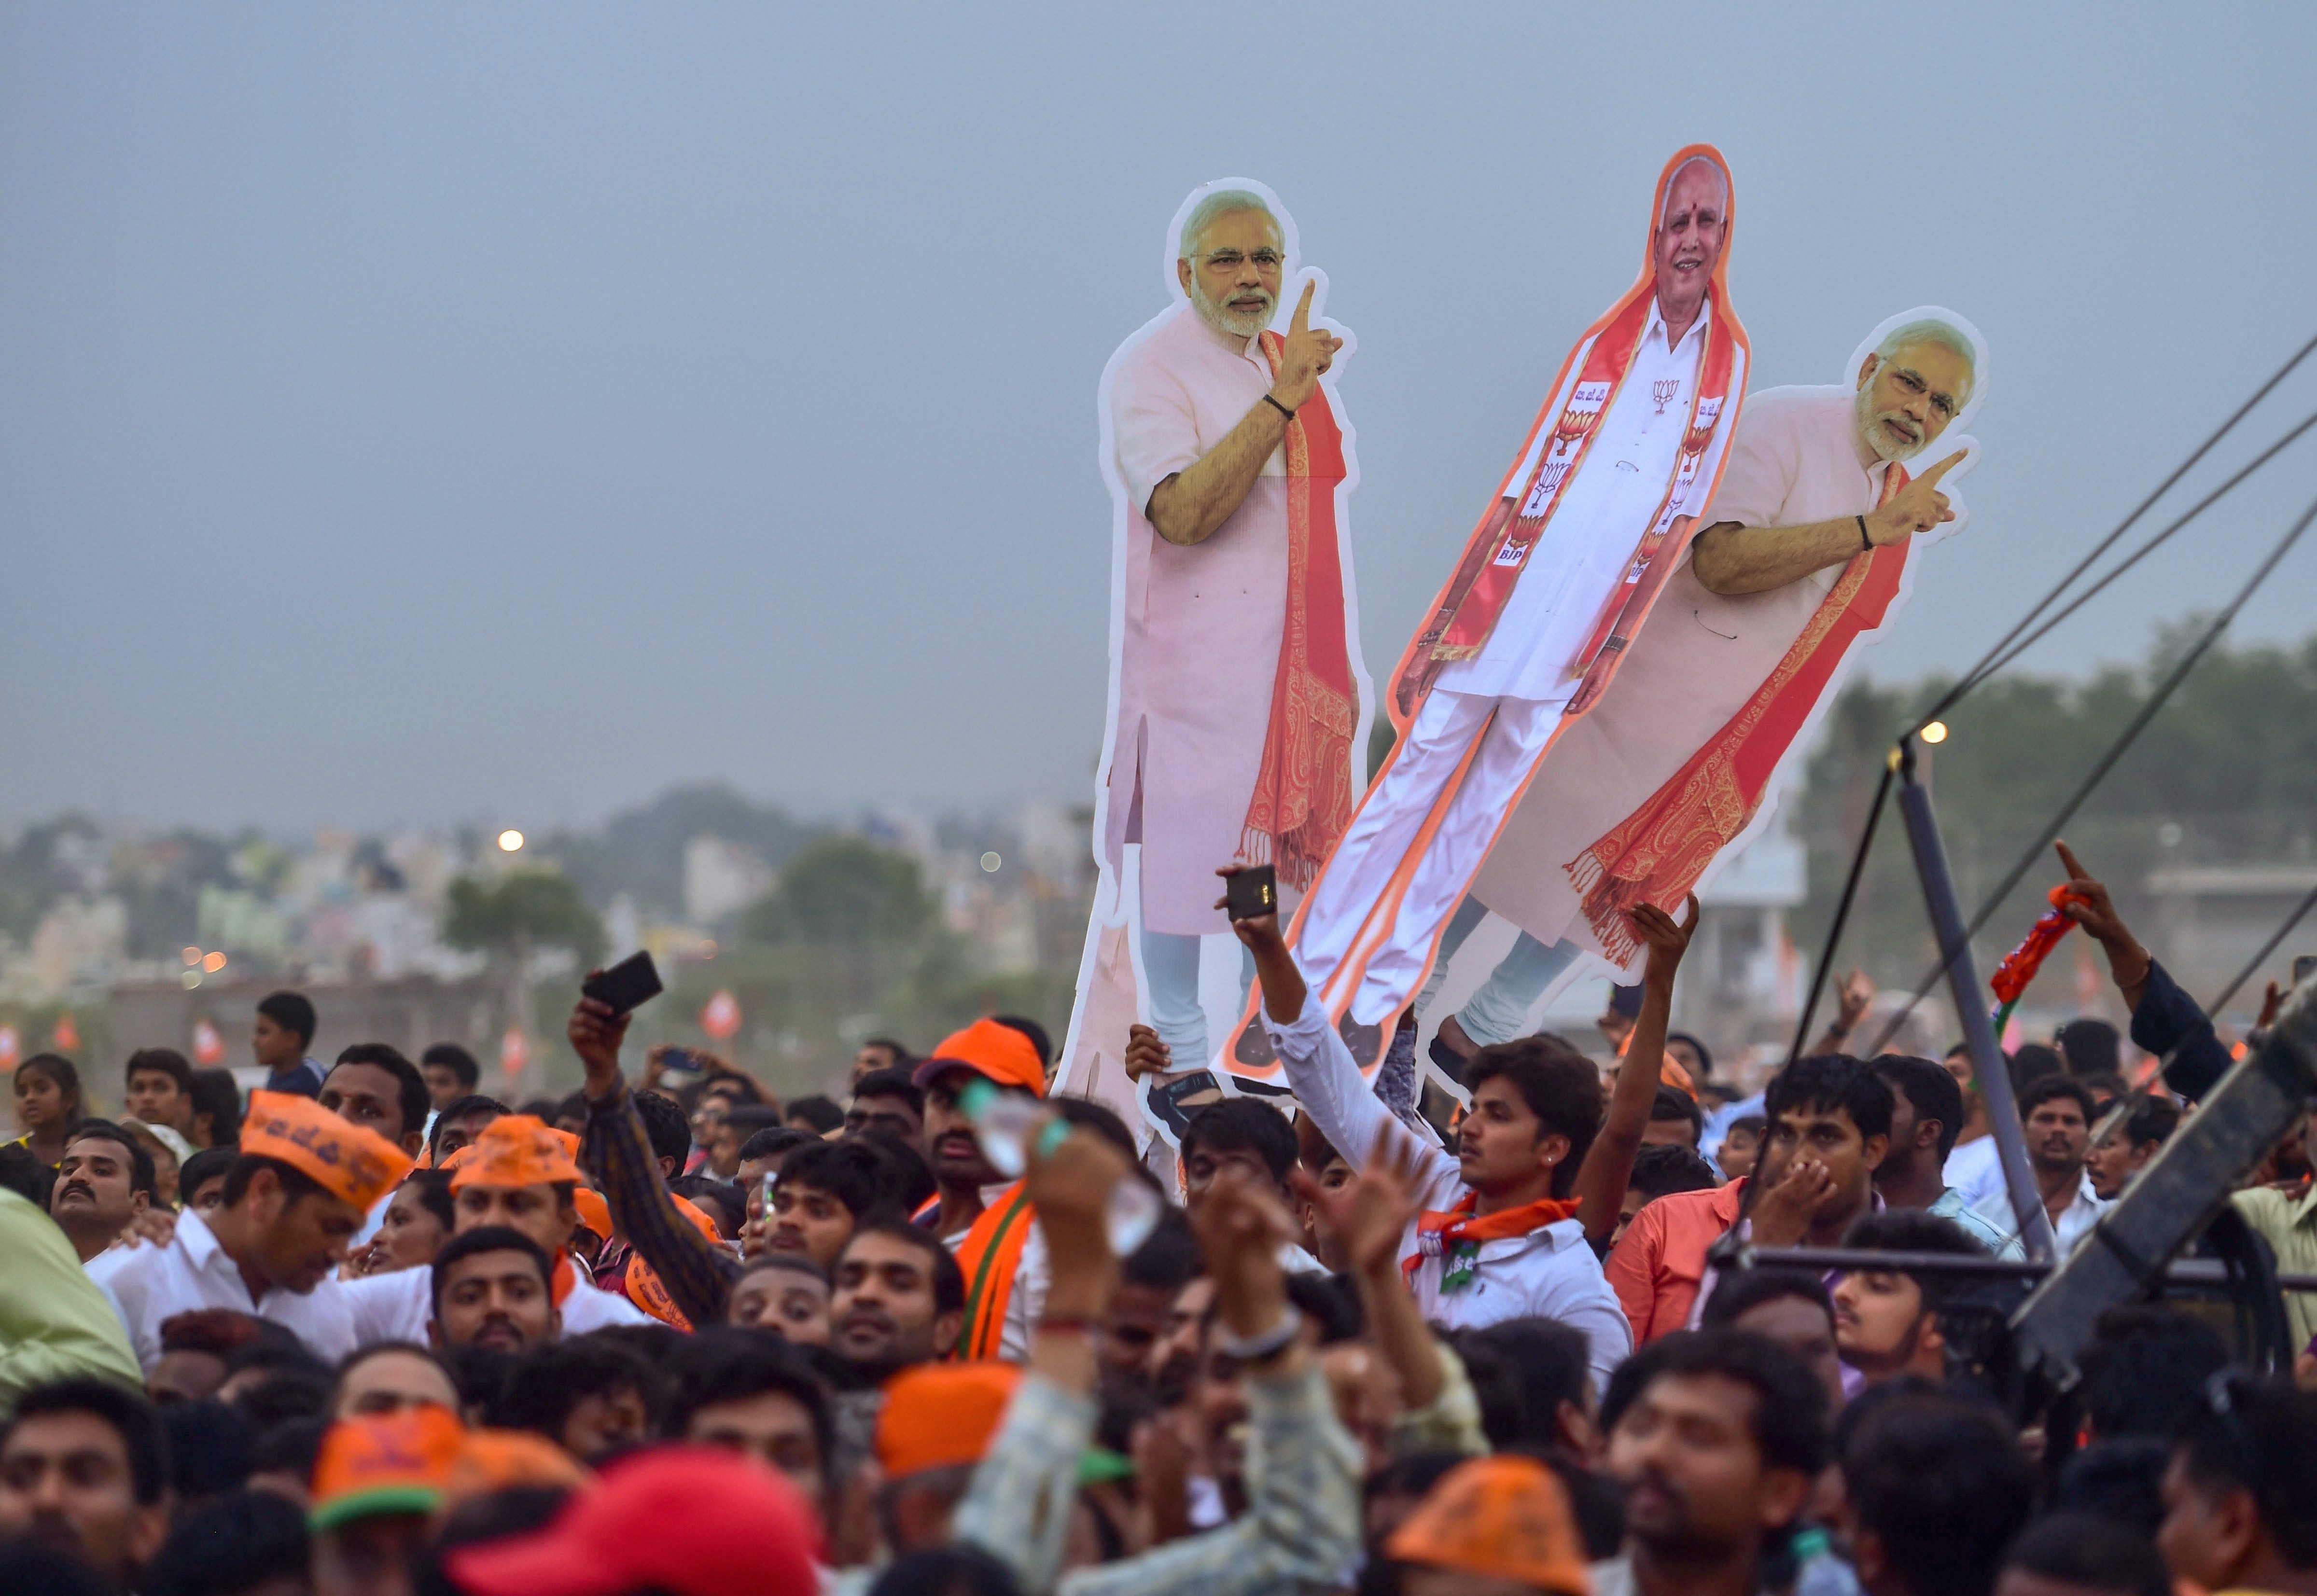 Bengaluru: BJP supporters at Prime Minister Narendra Modi's public rally ahead of Karnataka Assembly elections, in Bengaluru on Thursday. PTI Photo by Shailendra Bhojak (PTI5_3_2018_000193B)